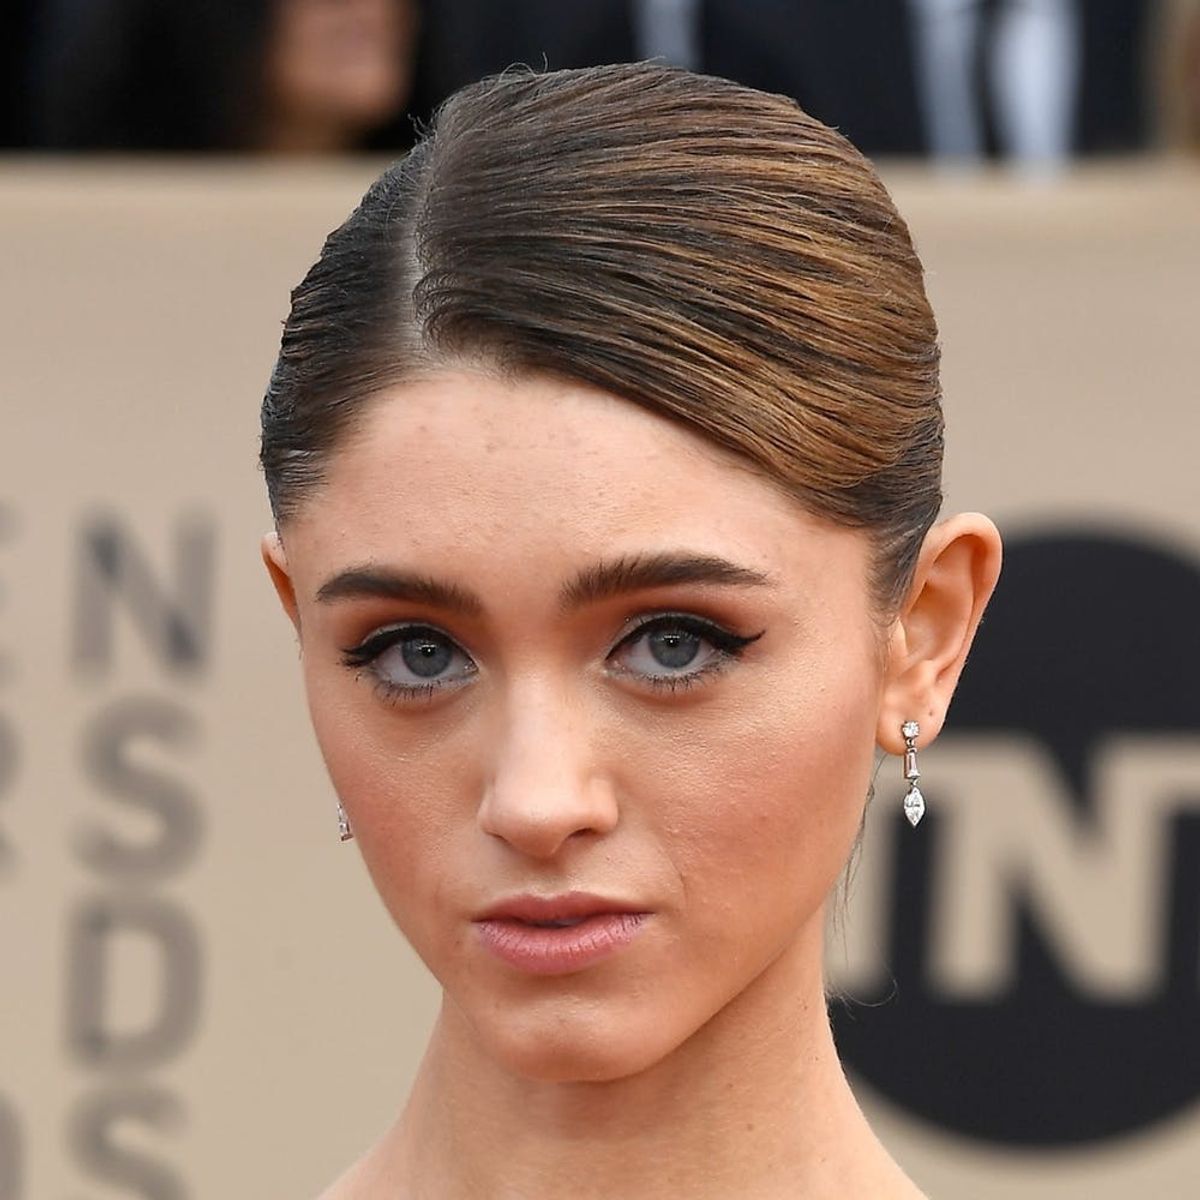 The Hidden Detail You Might Have Missed on Natalia Dyer’s 2018 SAG Awards Gown